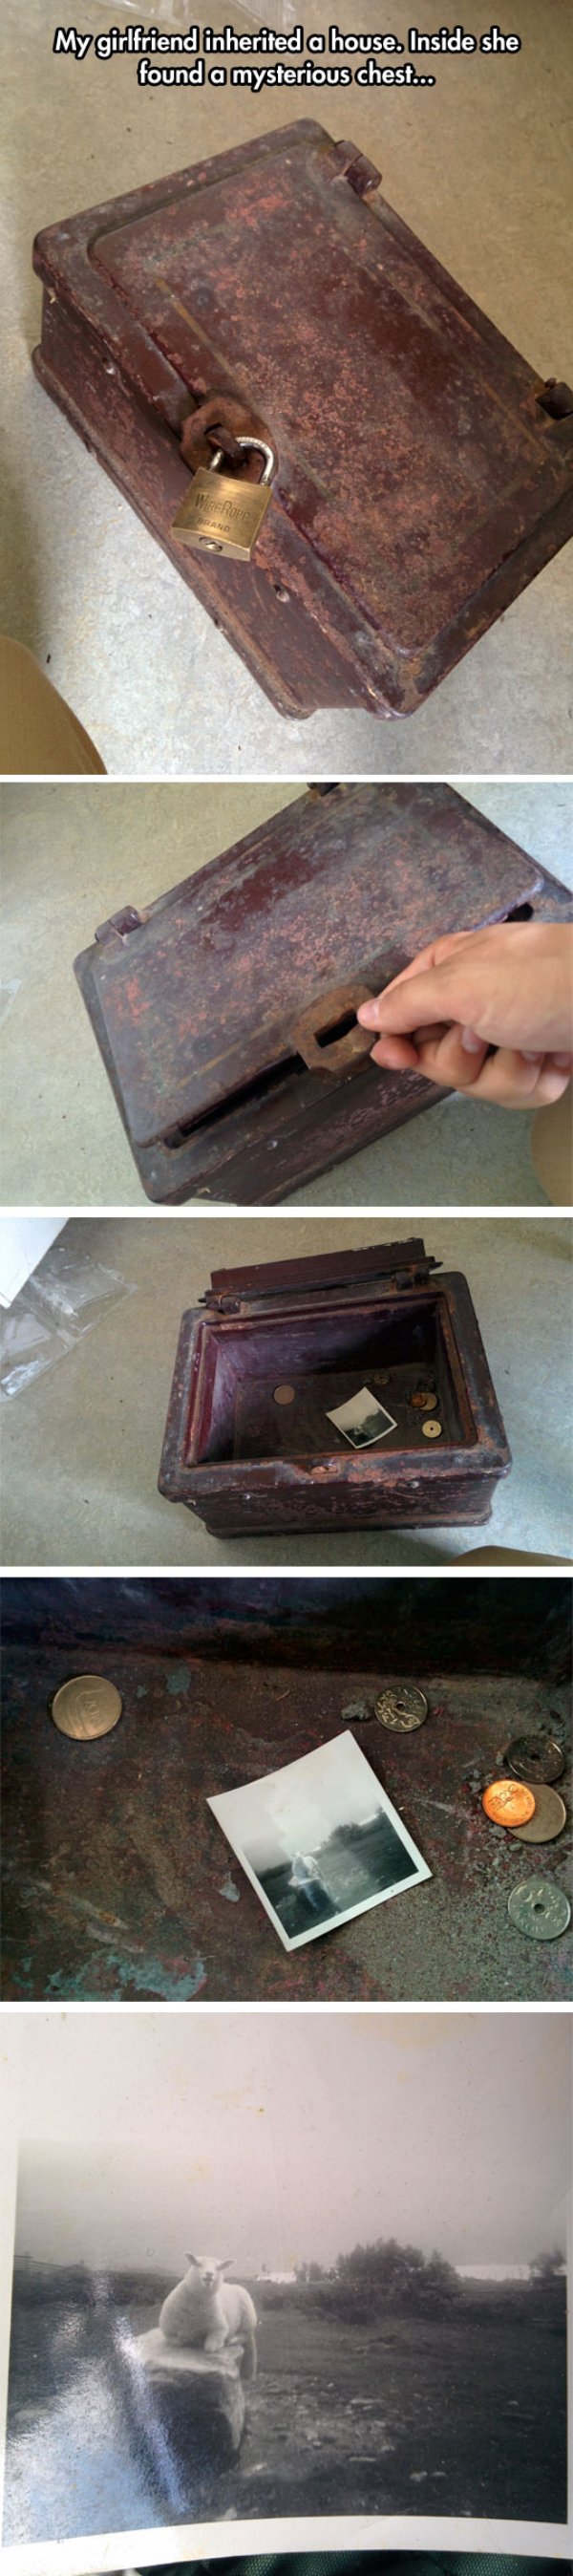 My girlfriend inherited a house. Inside she found a mysterious chest.co Wiperope